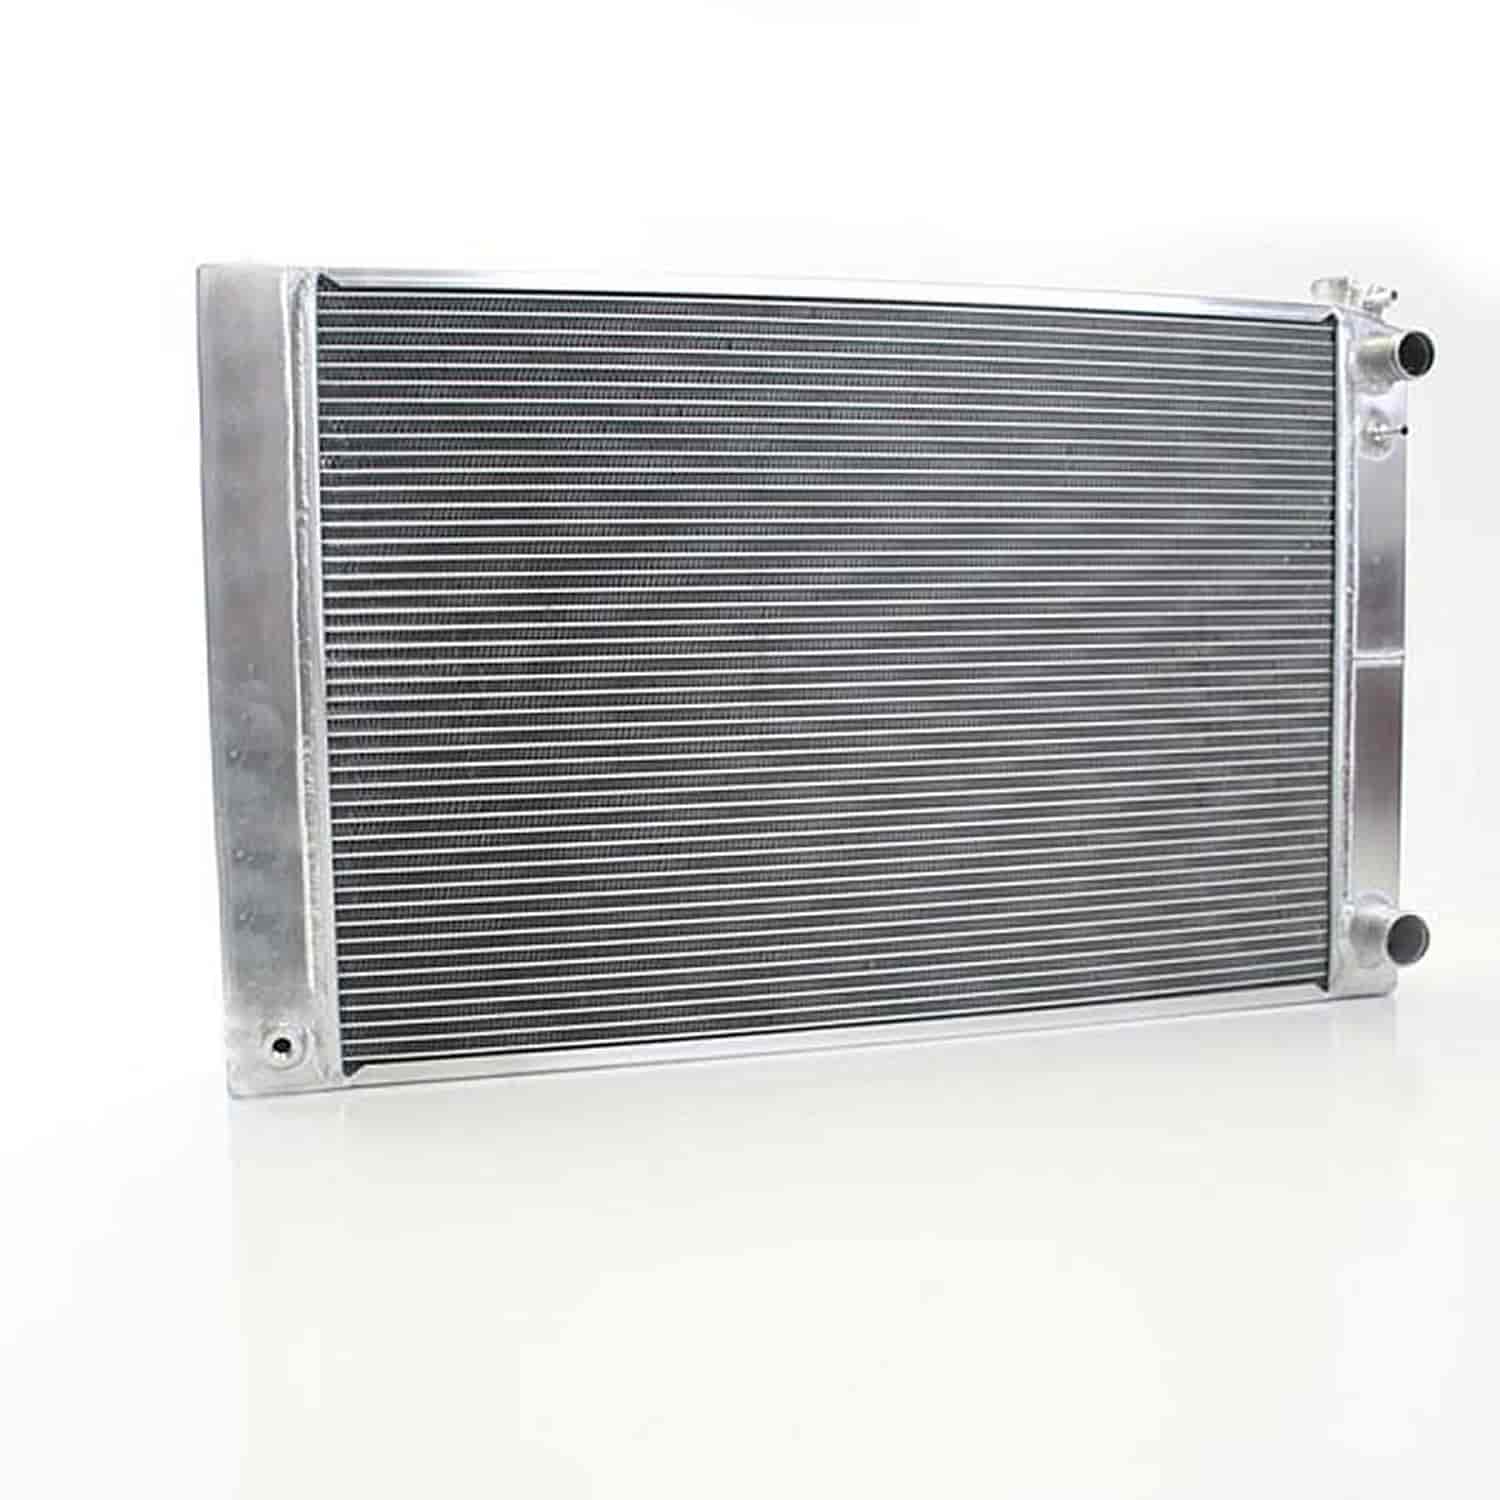 PerformanceFit Radiator 1969-1973 Ford Midsize & Mustang for LS Swap